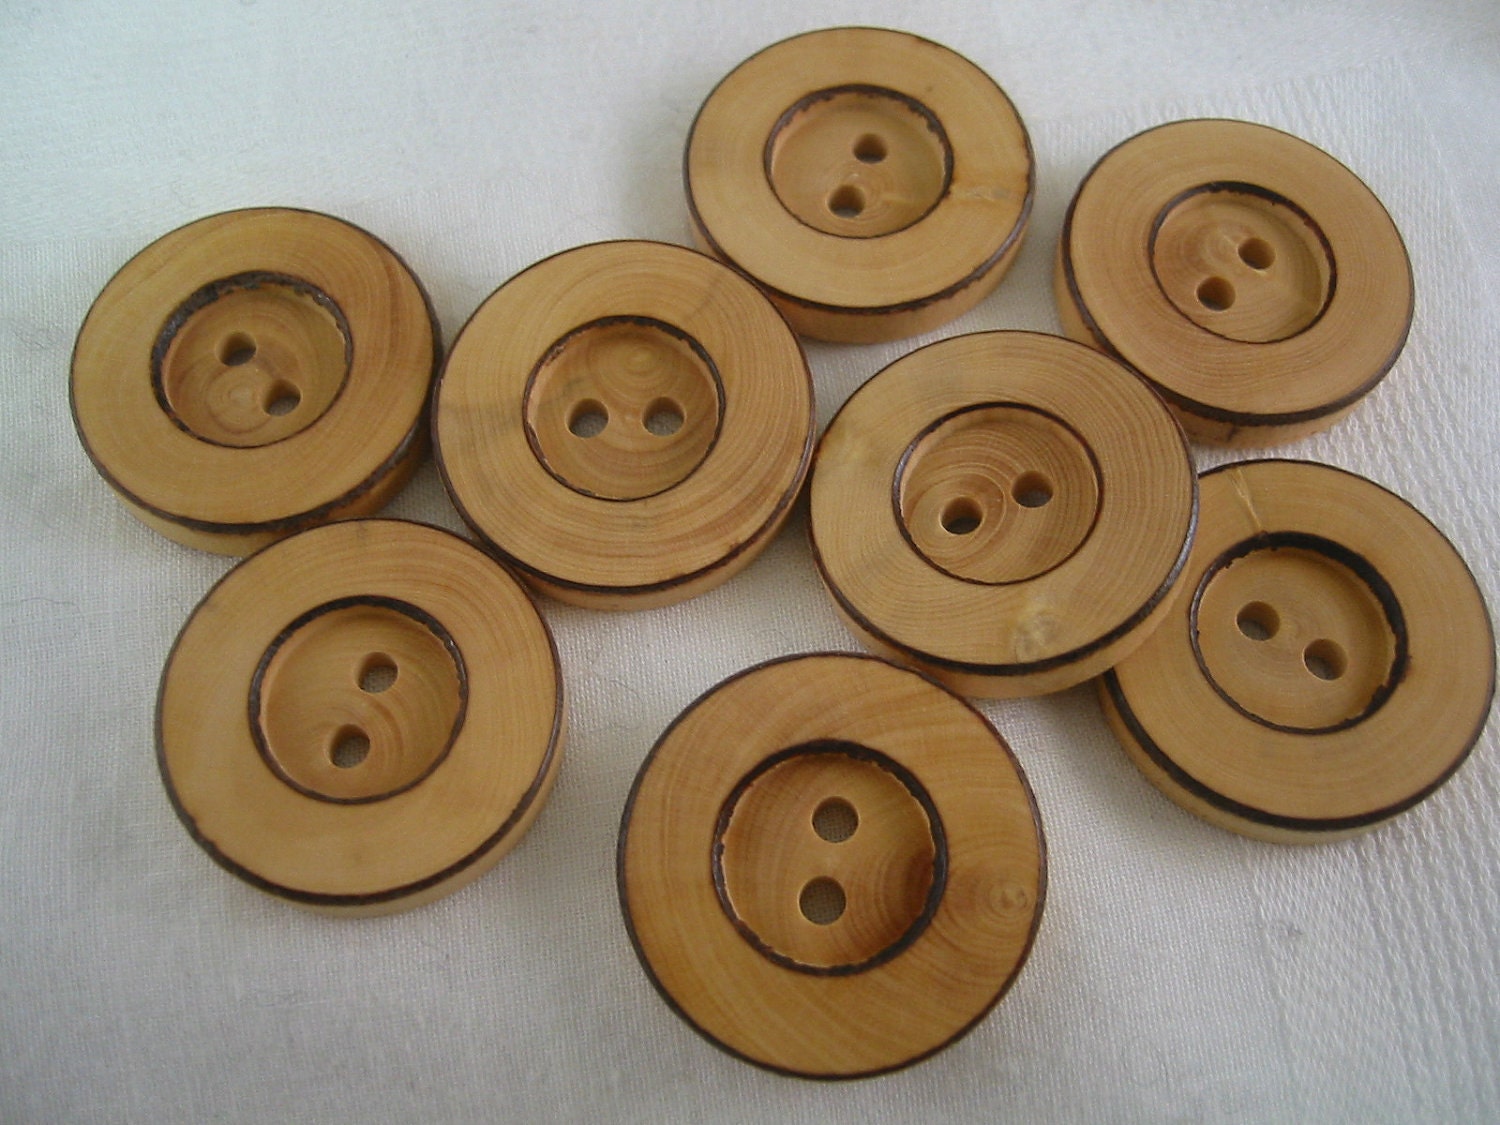 Unfinished Wooden Buttons for Crafts and Sewing 1/2 inch Bulk Pack of 25  Decorative Buttons by Woodpeckers